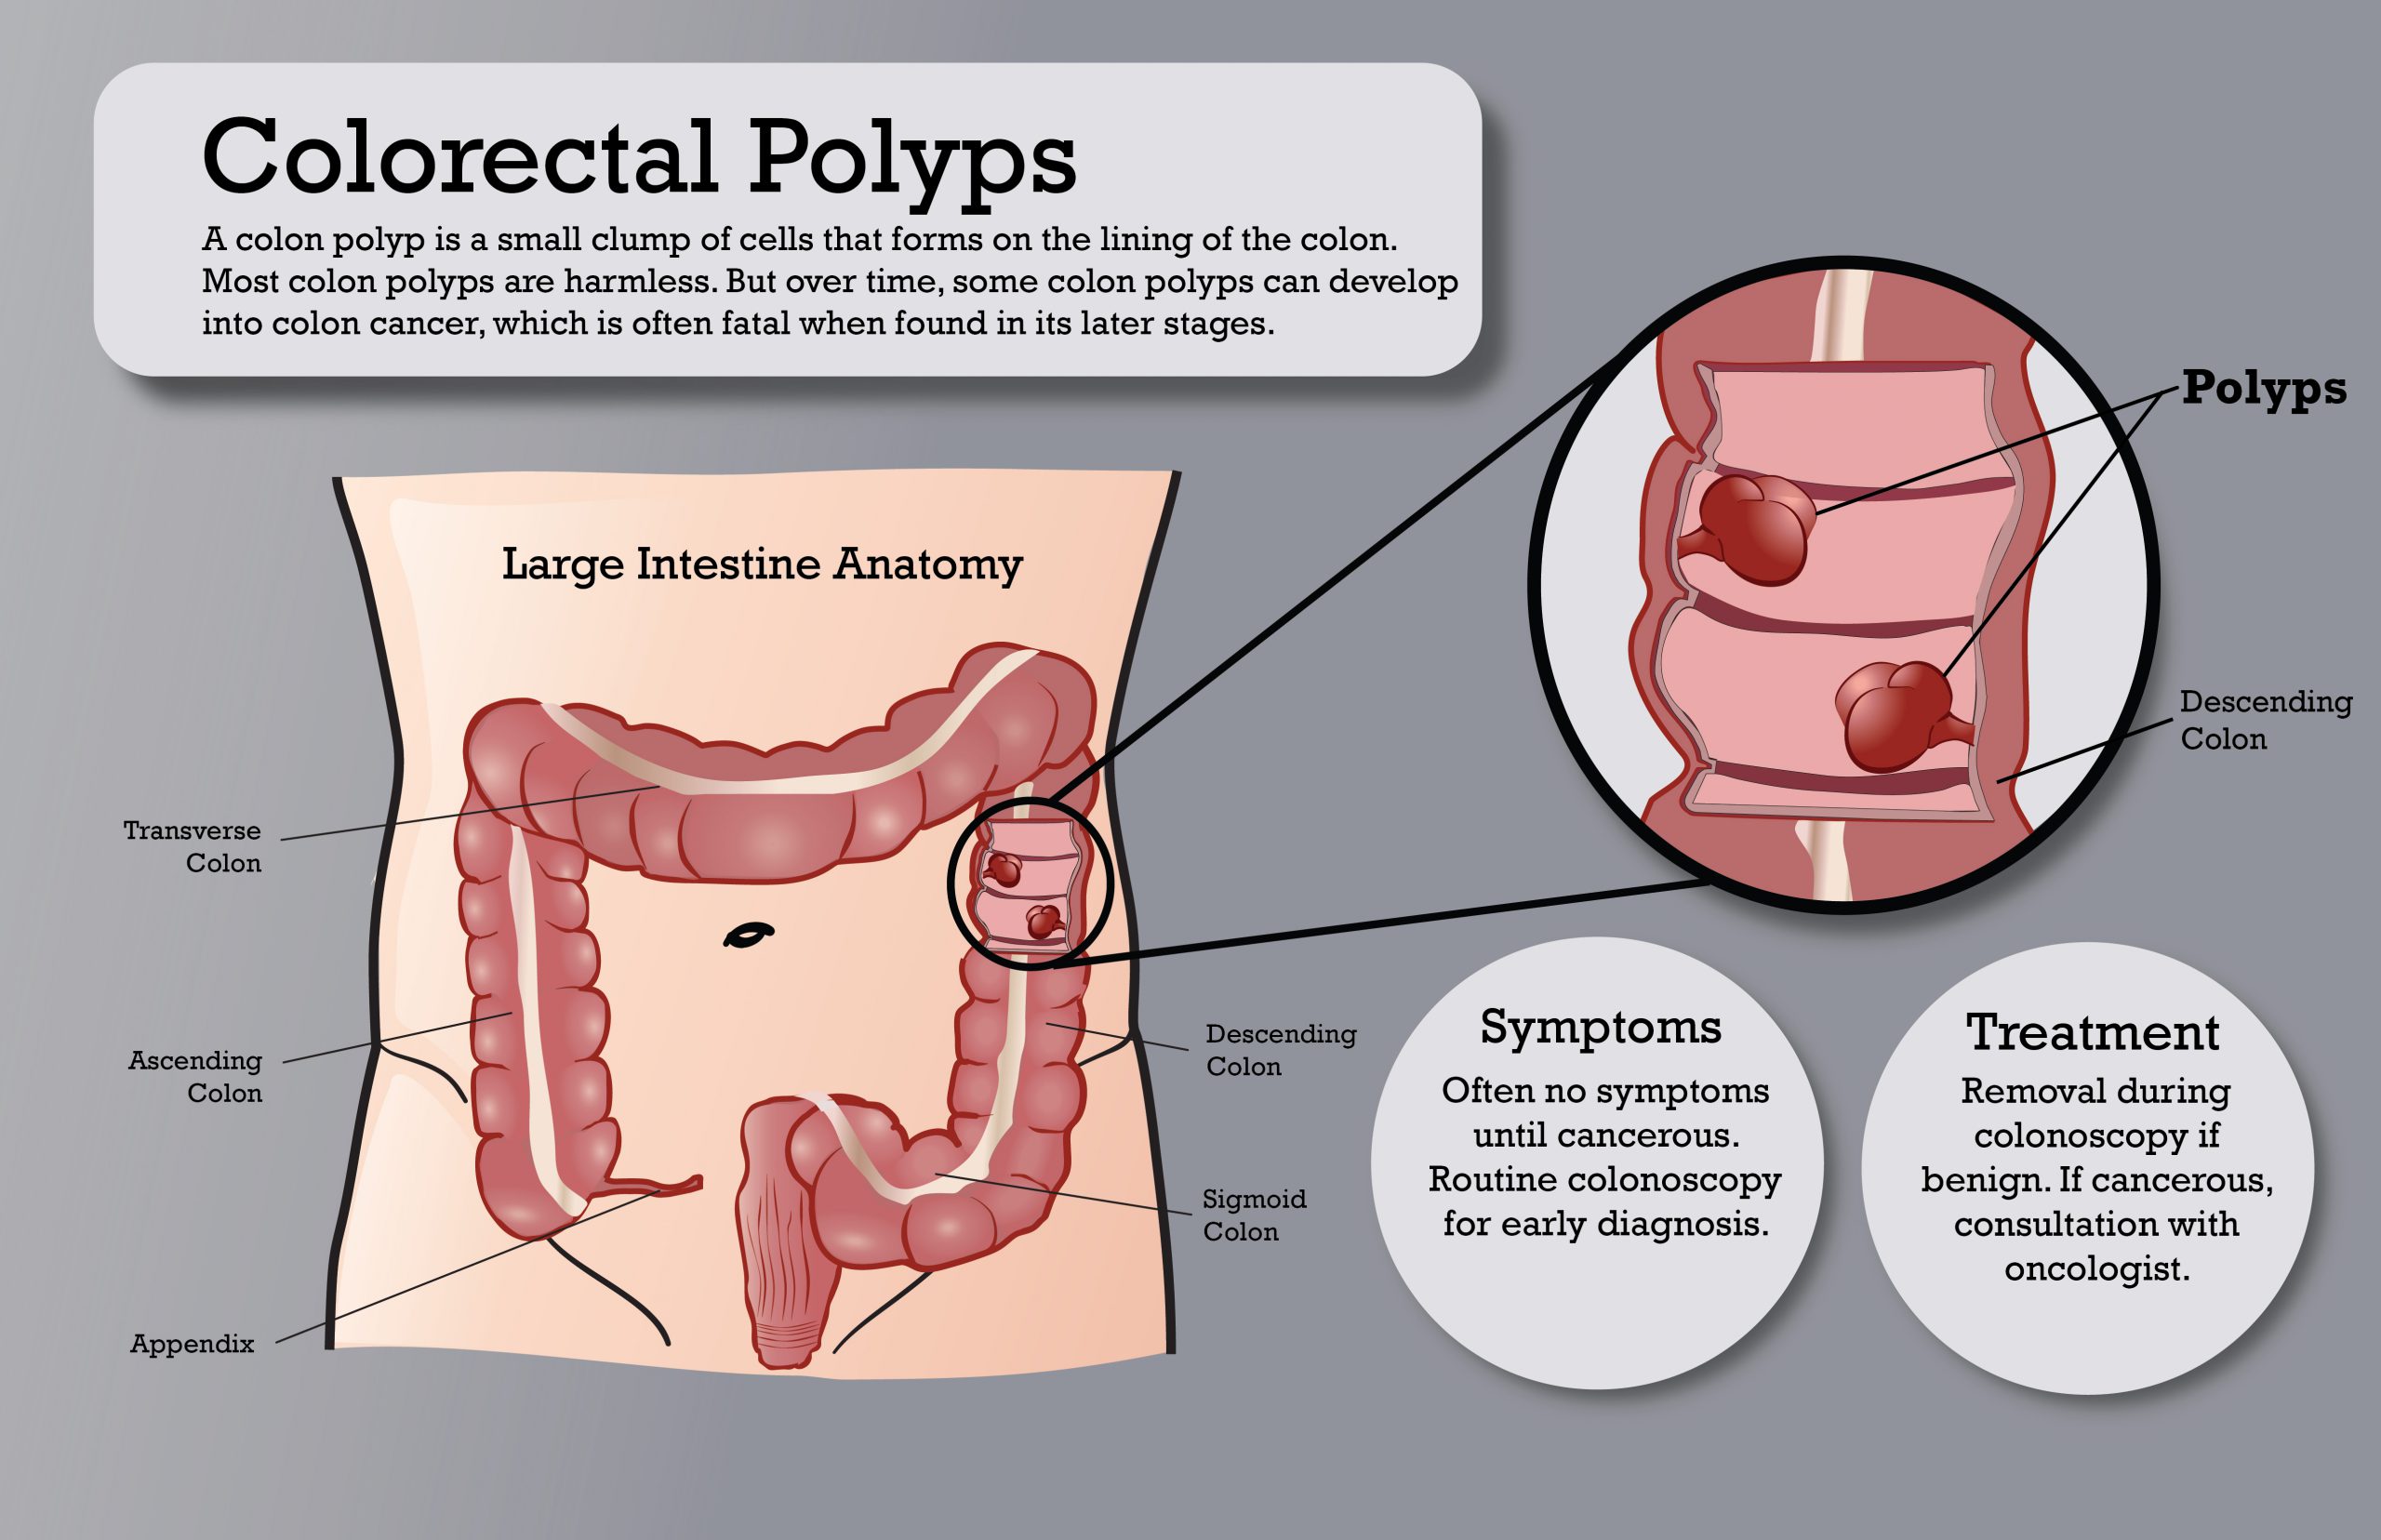 Colorectal-Polyps-poster-Recovered-01